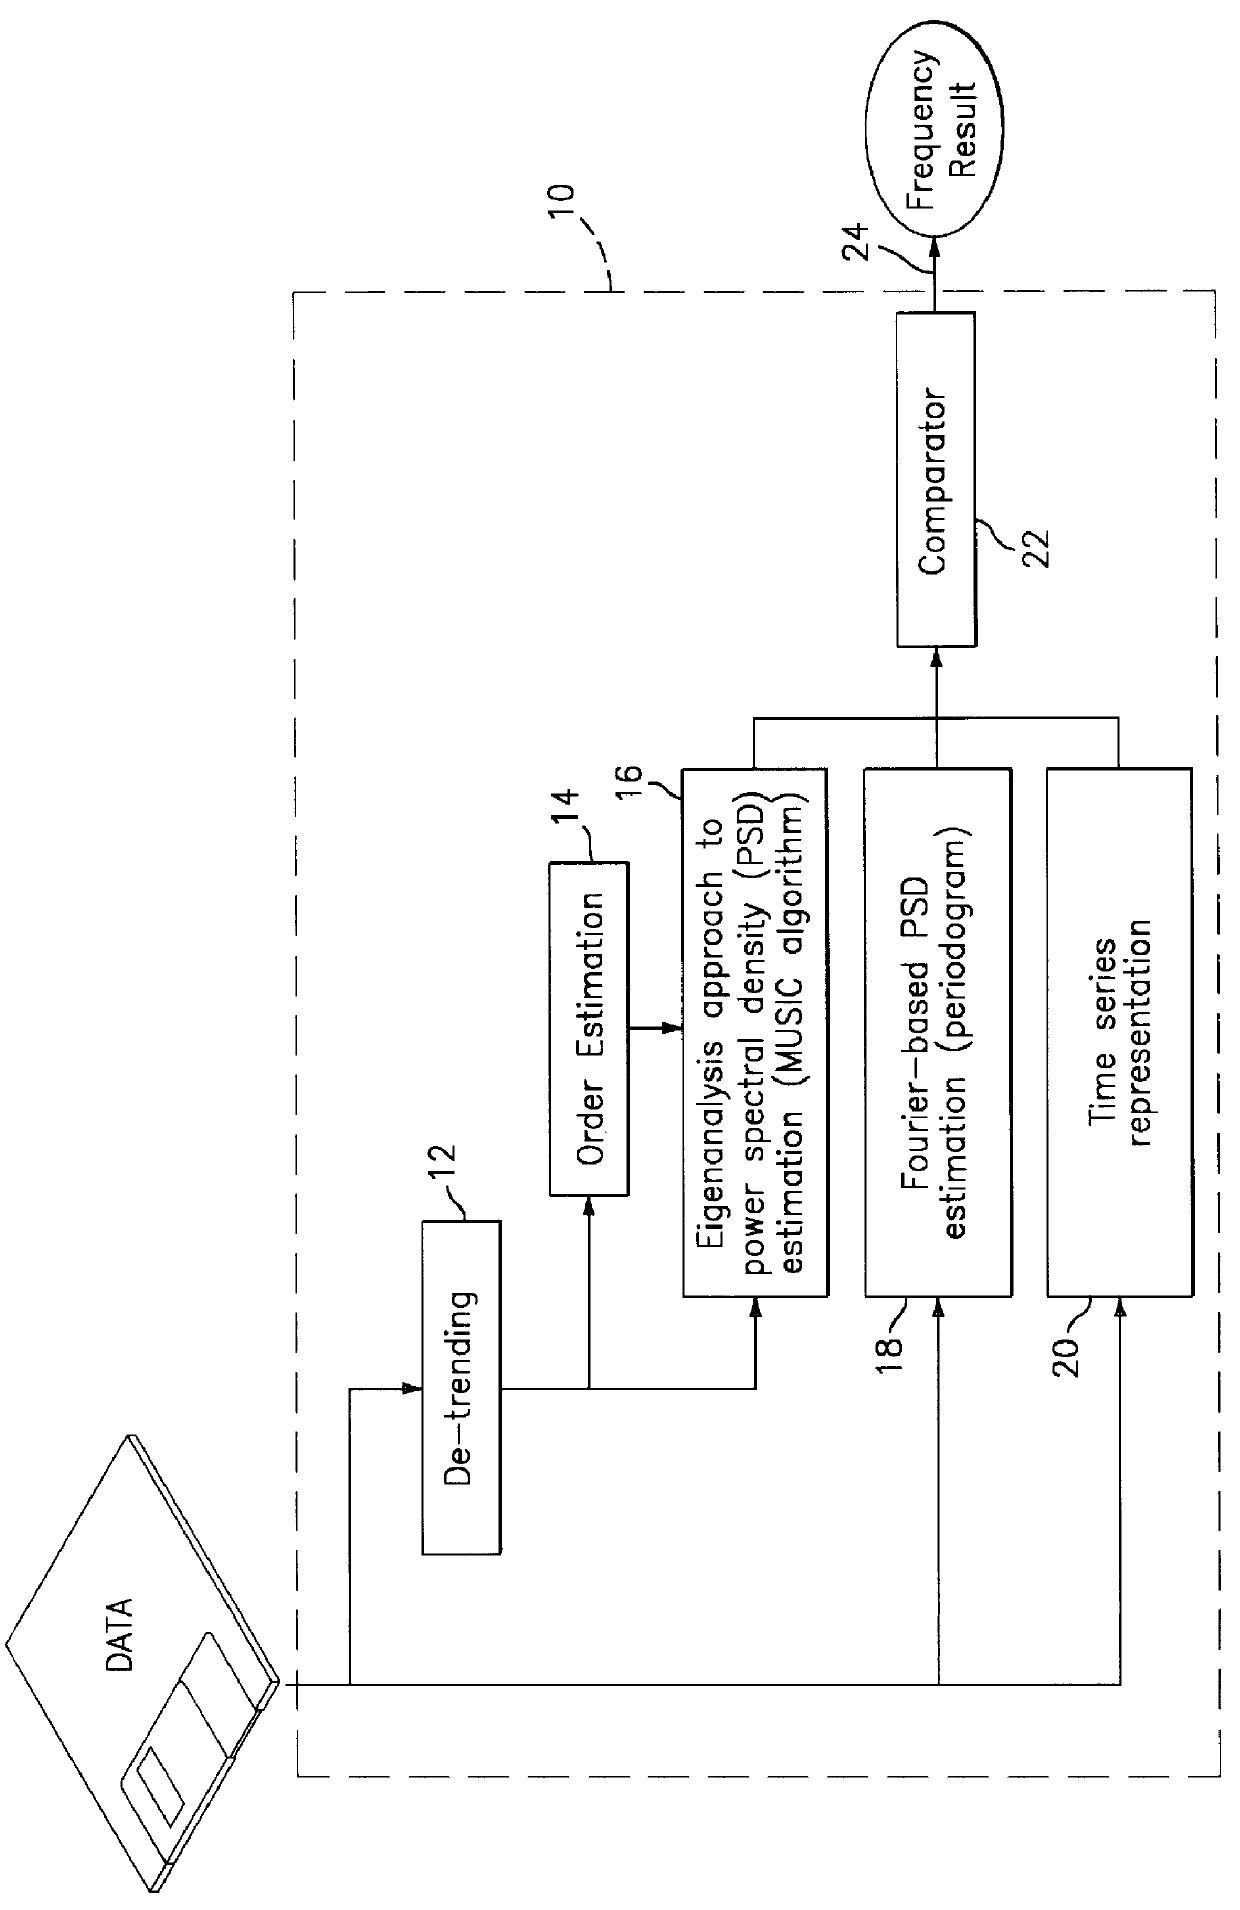 Automated method of frequency determination in software metric data through the use of the multiple signal classification (MUSIC) algorithm